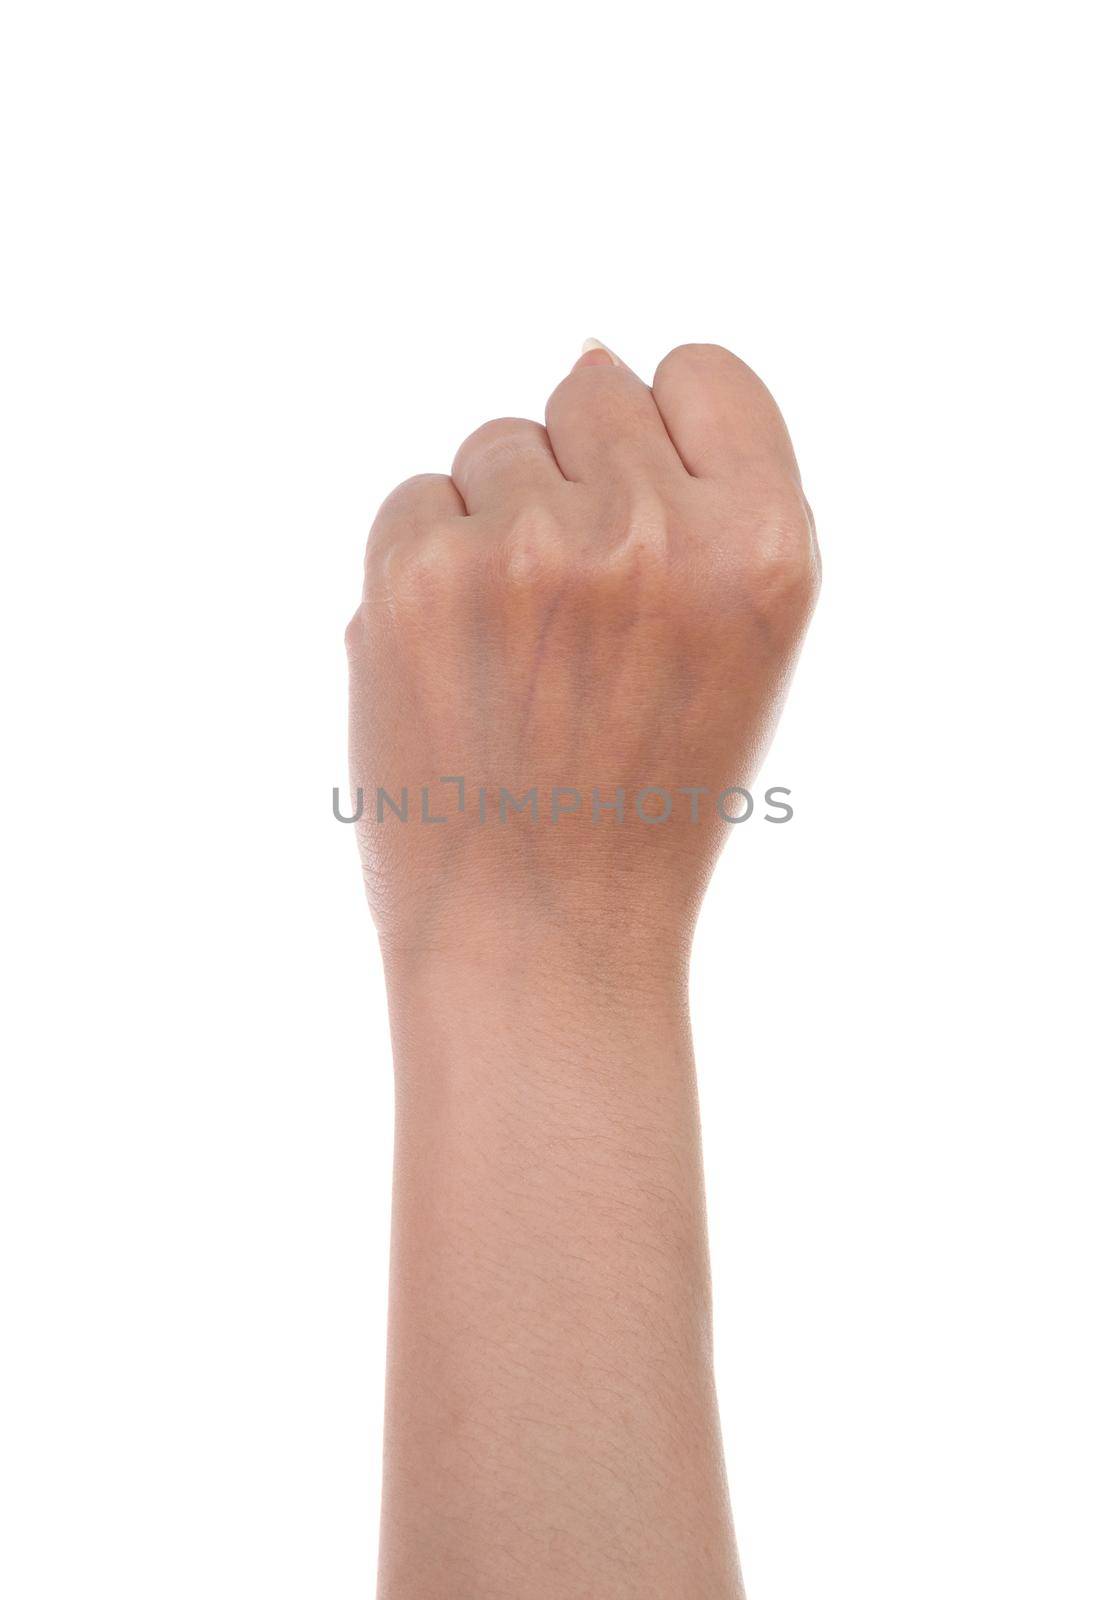 hand is showing zero fingers isolated on white background